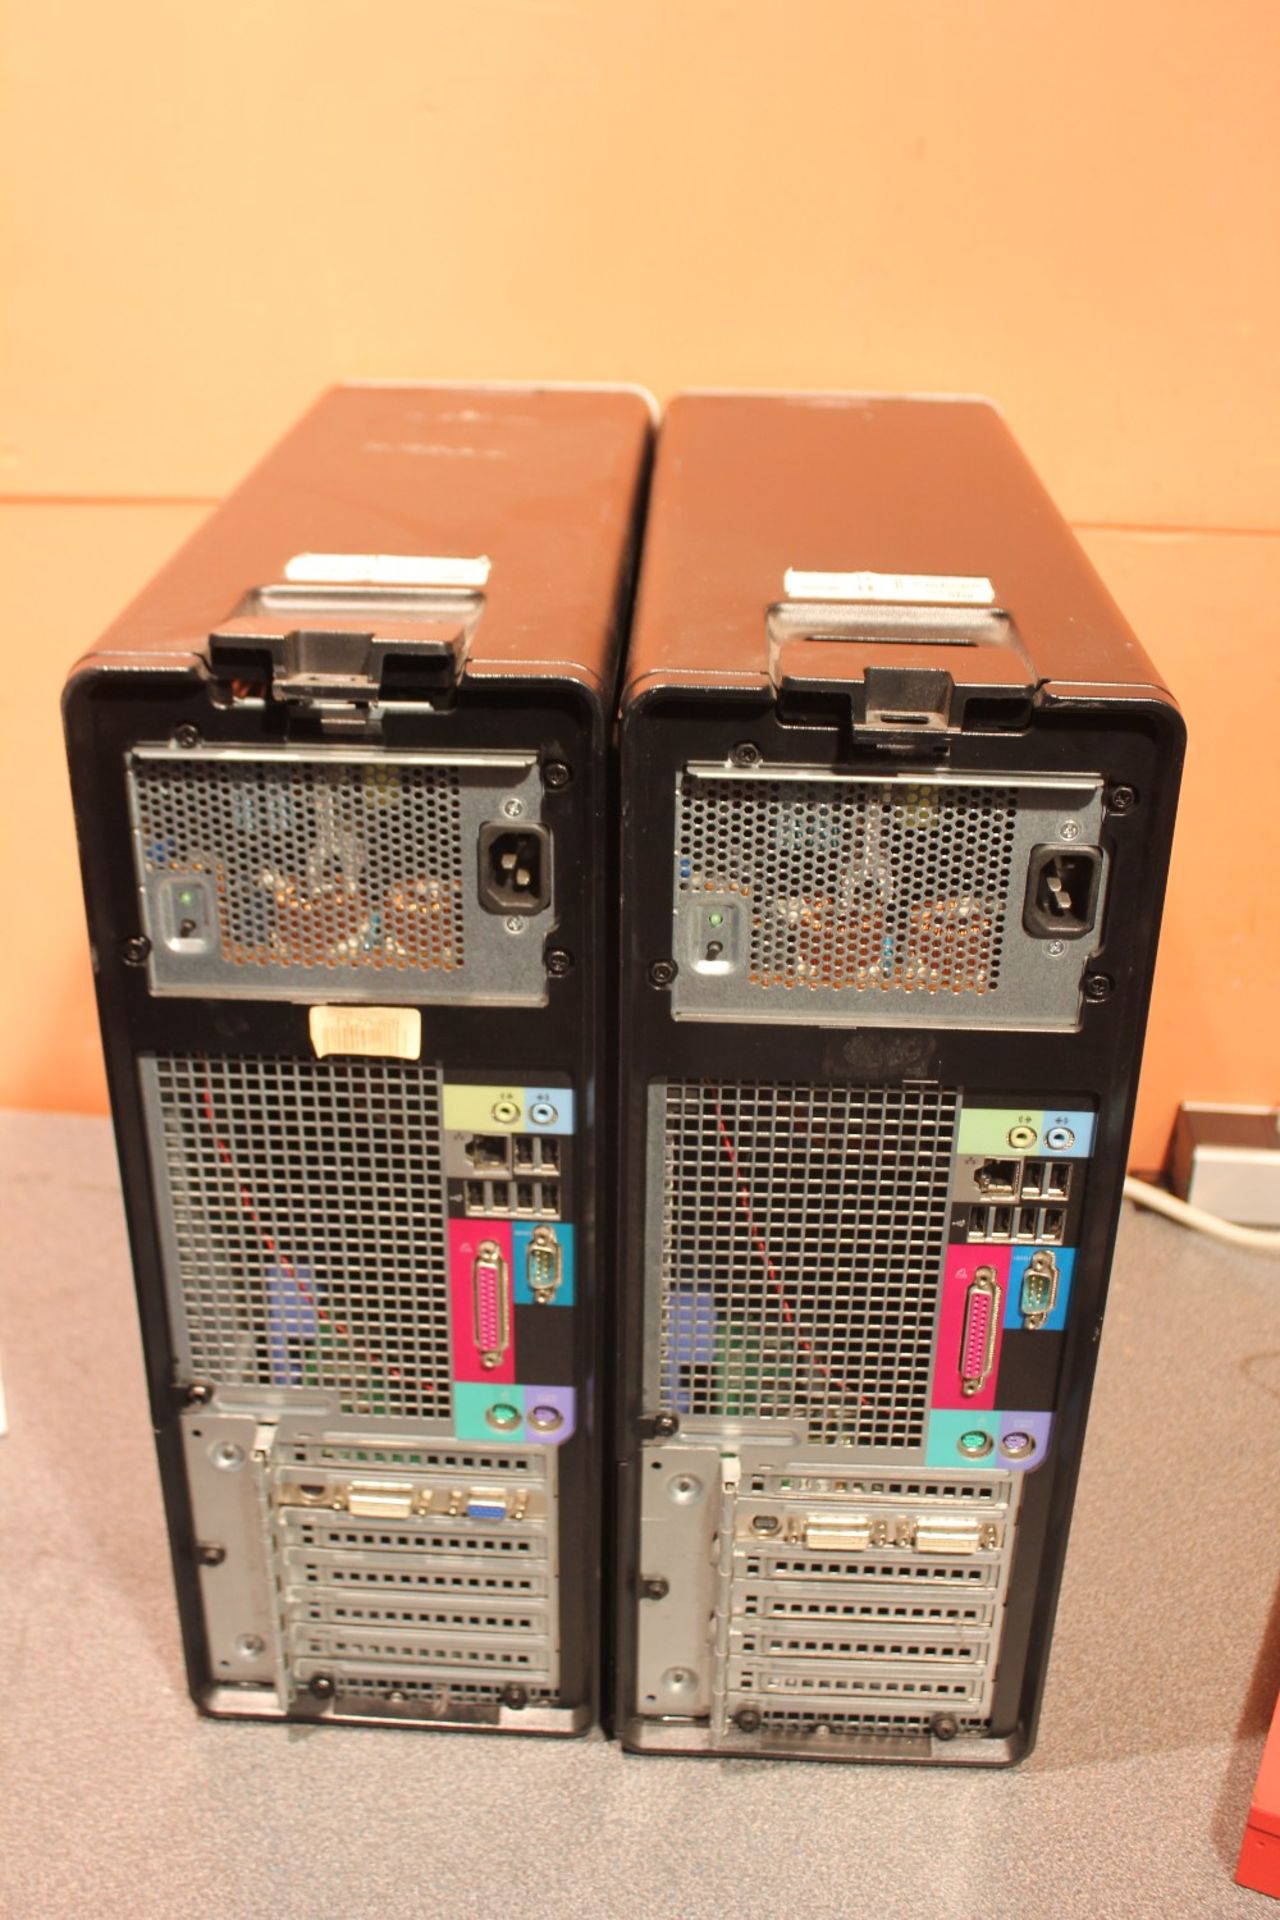 2X DELL Precision T3400 Tower Pc - Intel Core 2 Duo @ 2.33Ghz - 2GB Ram - 160Gb Hdd - DVD-Rom - - Image 2 of 2